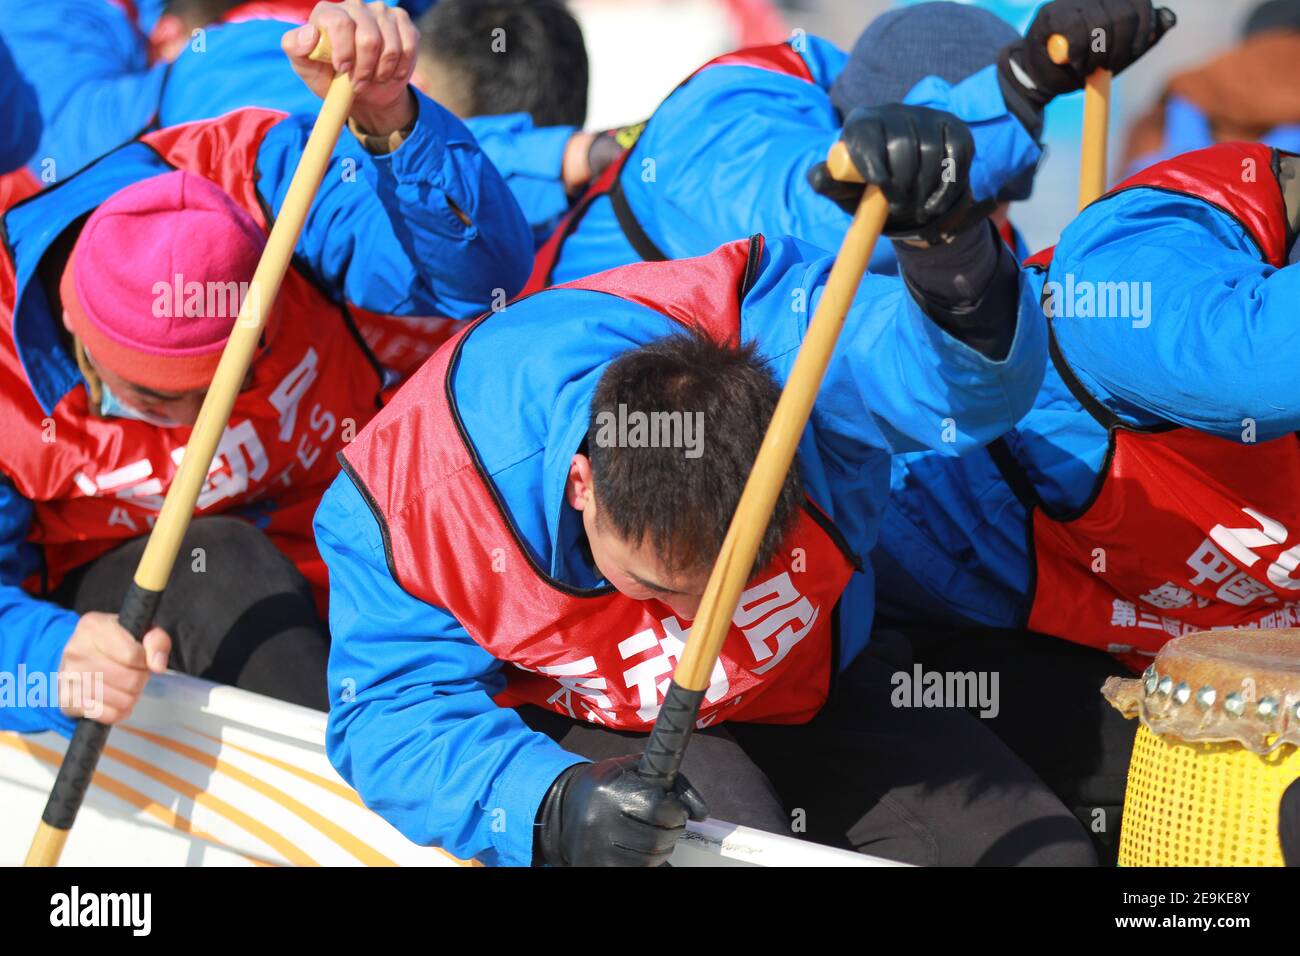 Photo shows people participate in ice dragon boats competition in Shenyang City, northeast China’s Liaoning Province, 2 February 2021. The 3rd Shenyang International Ice Dragon Boat Race kicked off on Tuesday in Shenyang to promote winter sports. Stock Photo